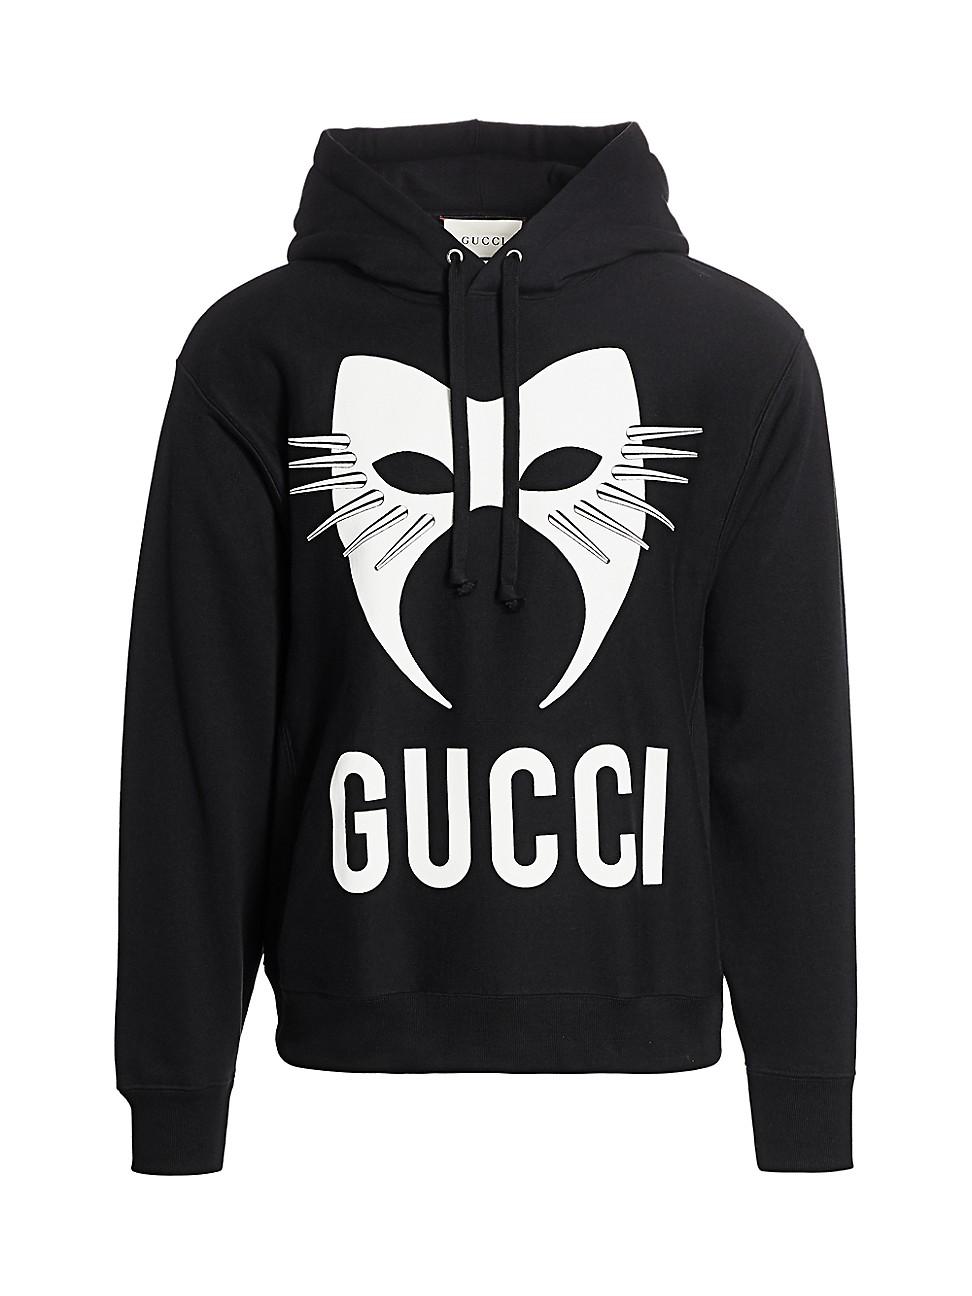 Gucci Mask Over The Head Hoodie in Black & White (Black) for Men - Lyst